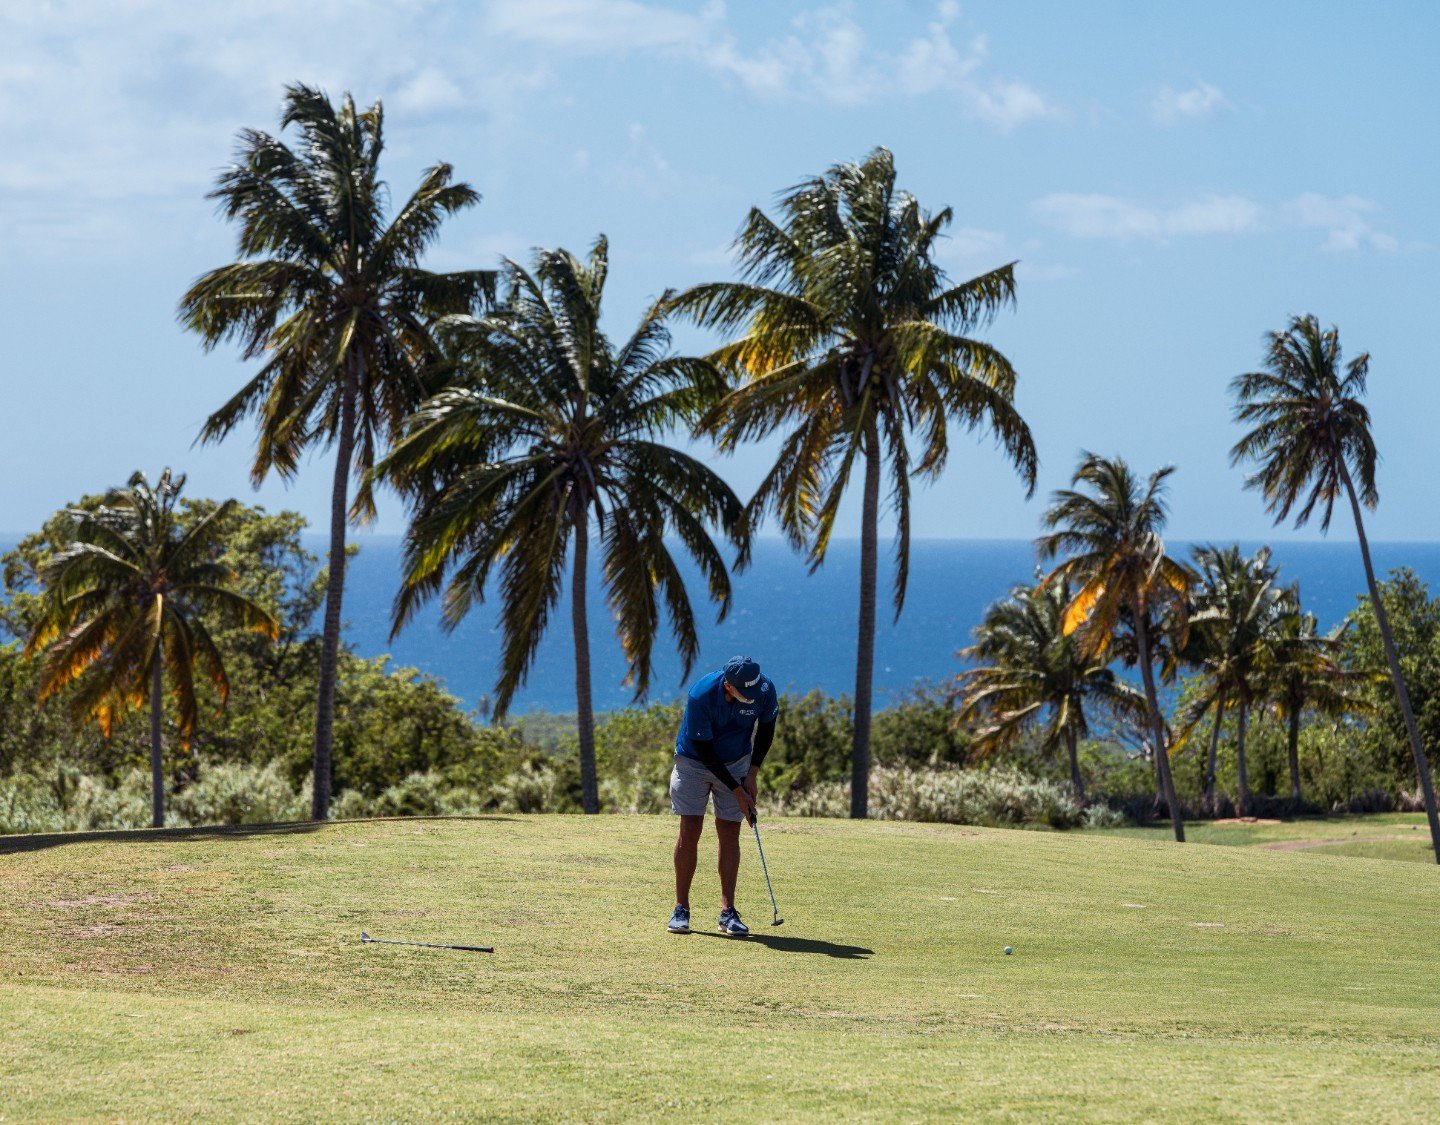 Wow, our golf club is absolutely stunning! 😍⛳️ From lush fairways to breathtaking views, every round feels like a dream come true. Come see for yourself and experience the beauty of PUNTA BORINQUEN GOLF CLUB! #GolfParadise #ScenicFairways